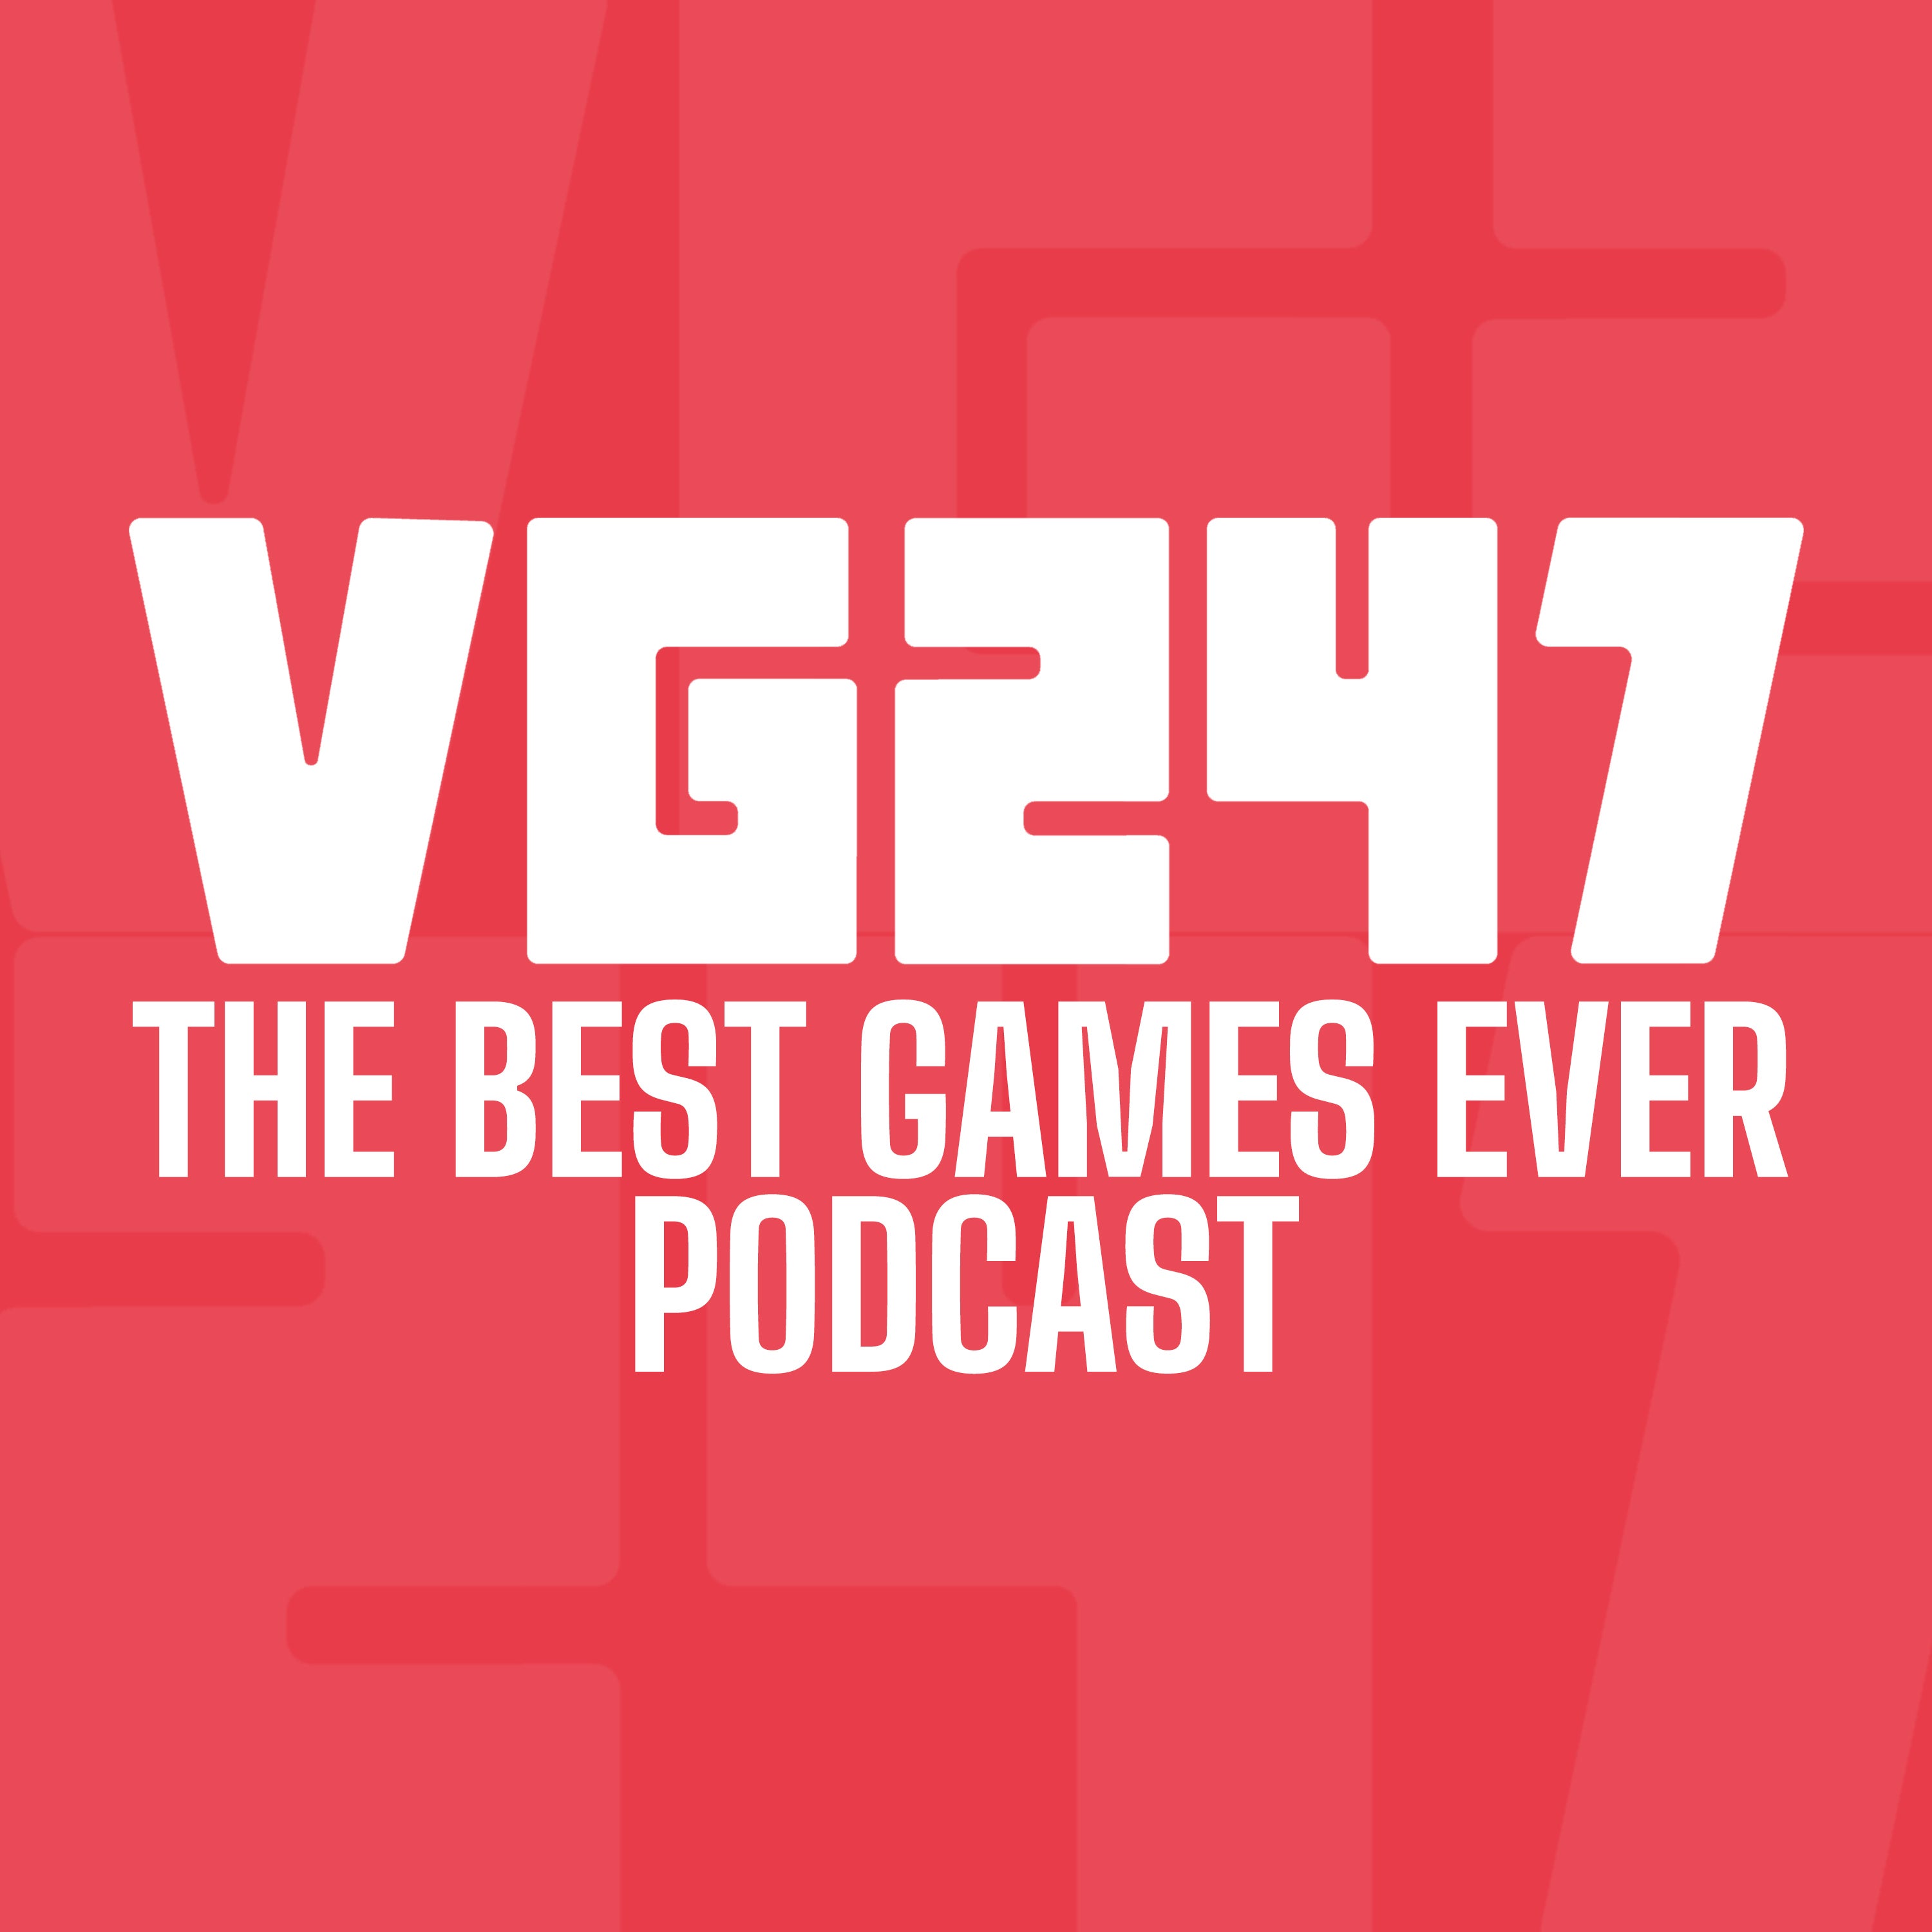 The logo for VG247's best game podcast ever.  White text on a red background.